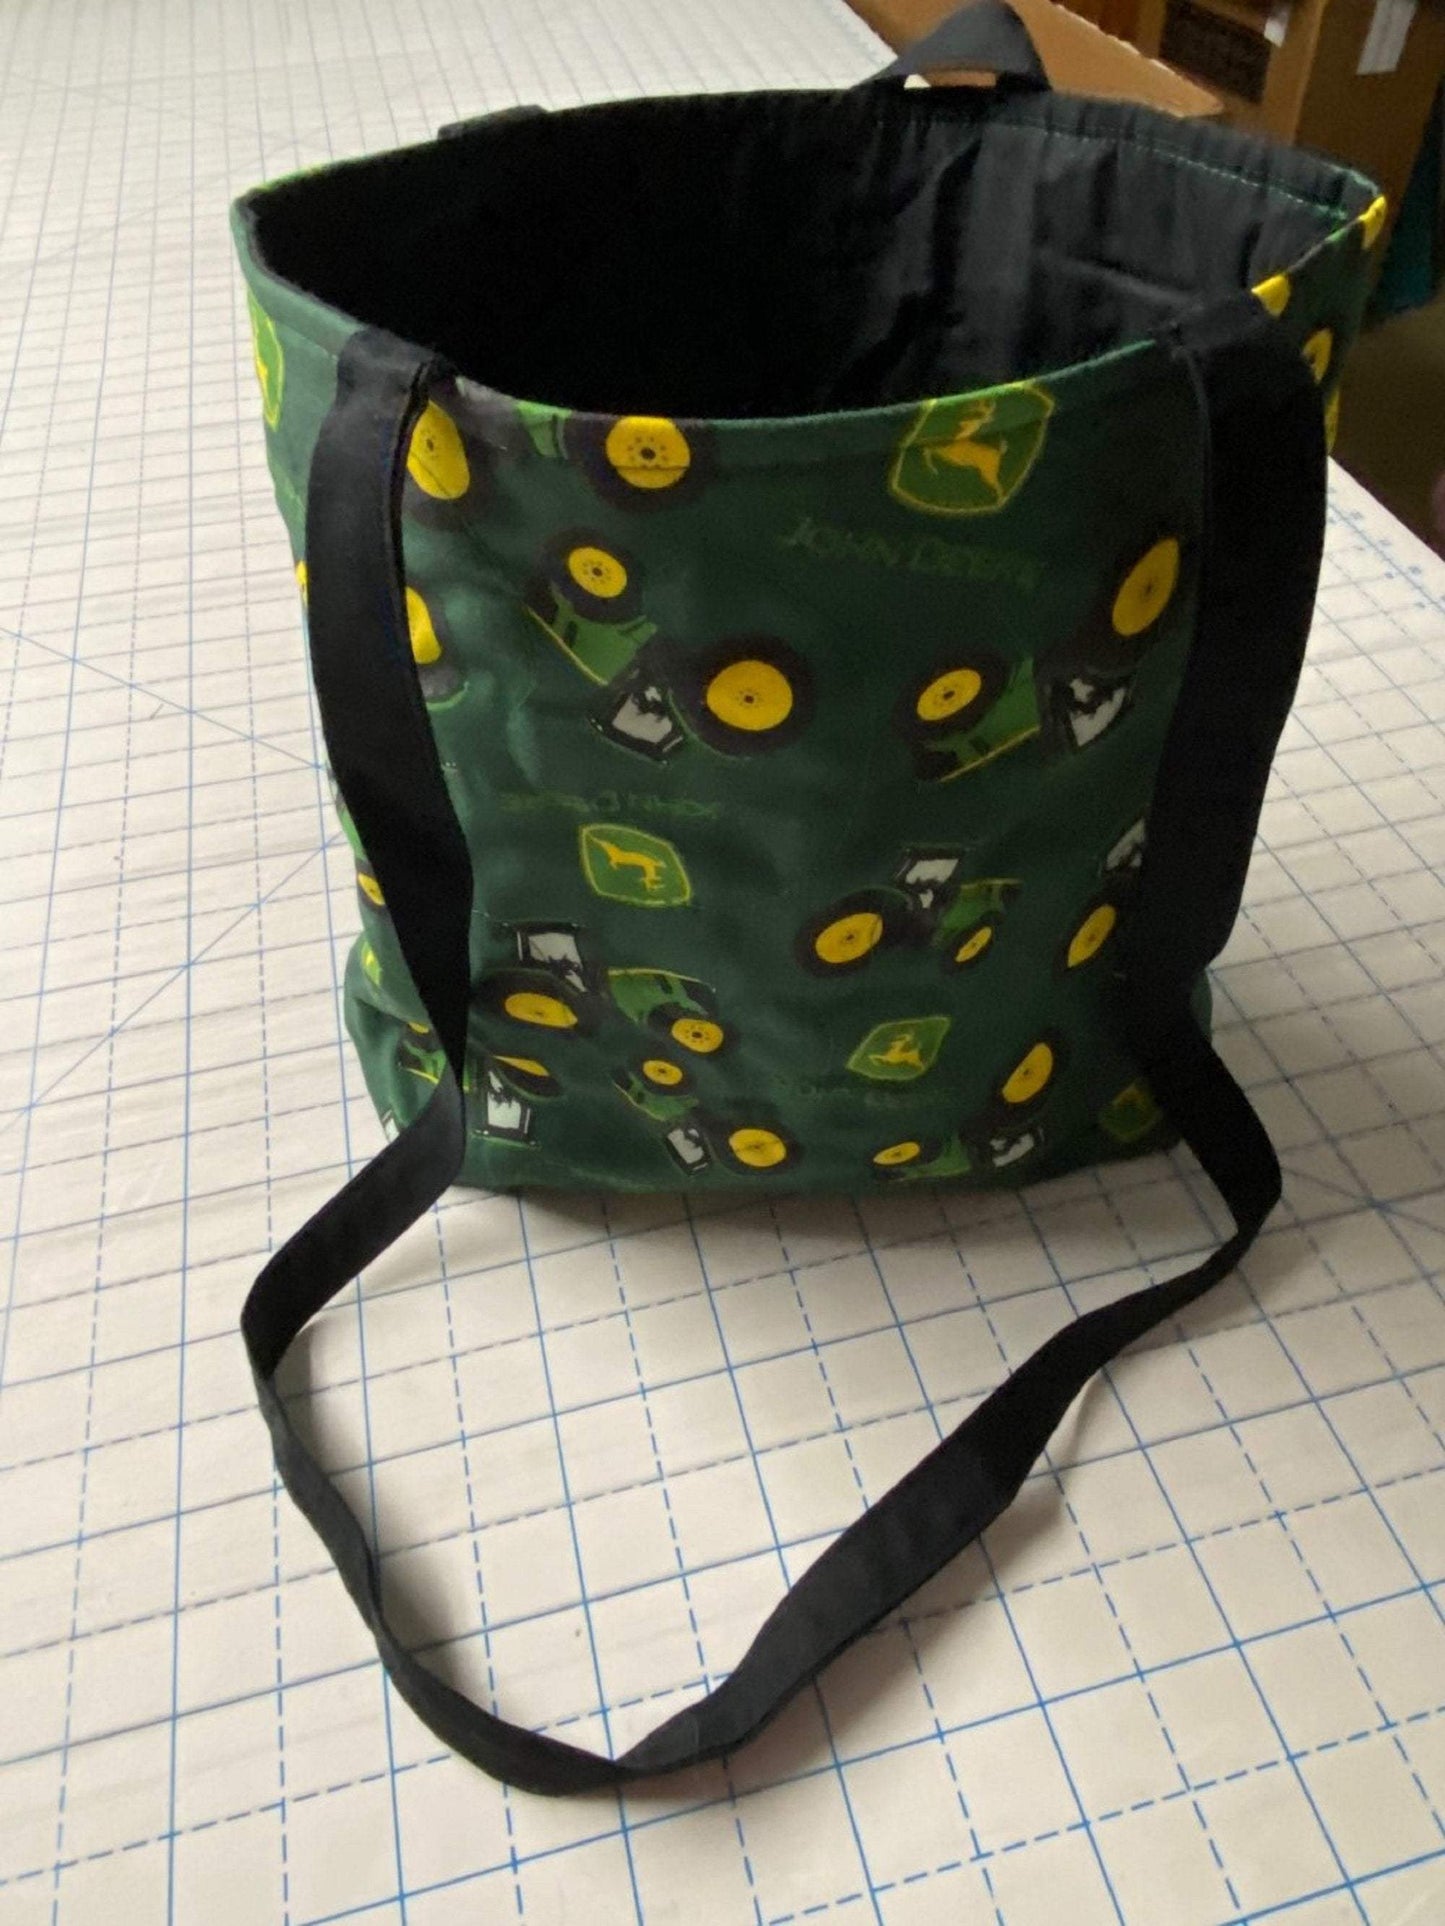 John Deere Tractors and Logos— Machine-Quilted Tote Bag